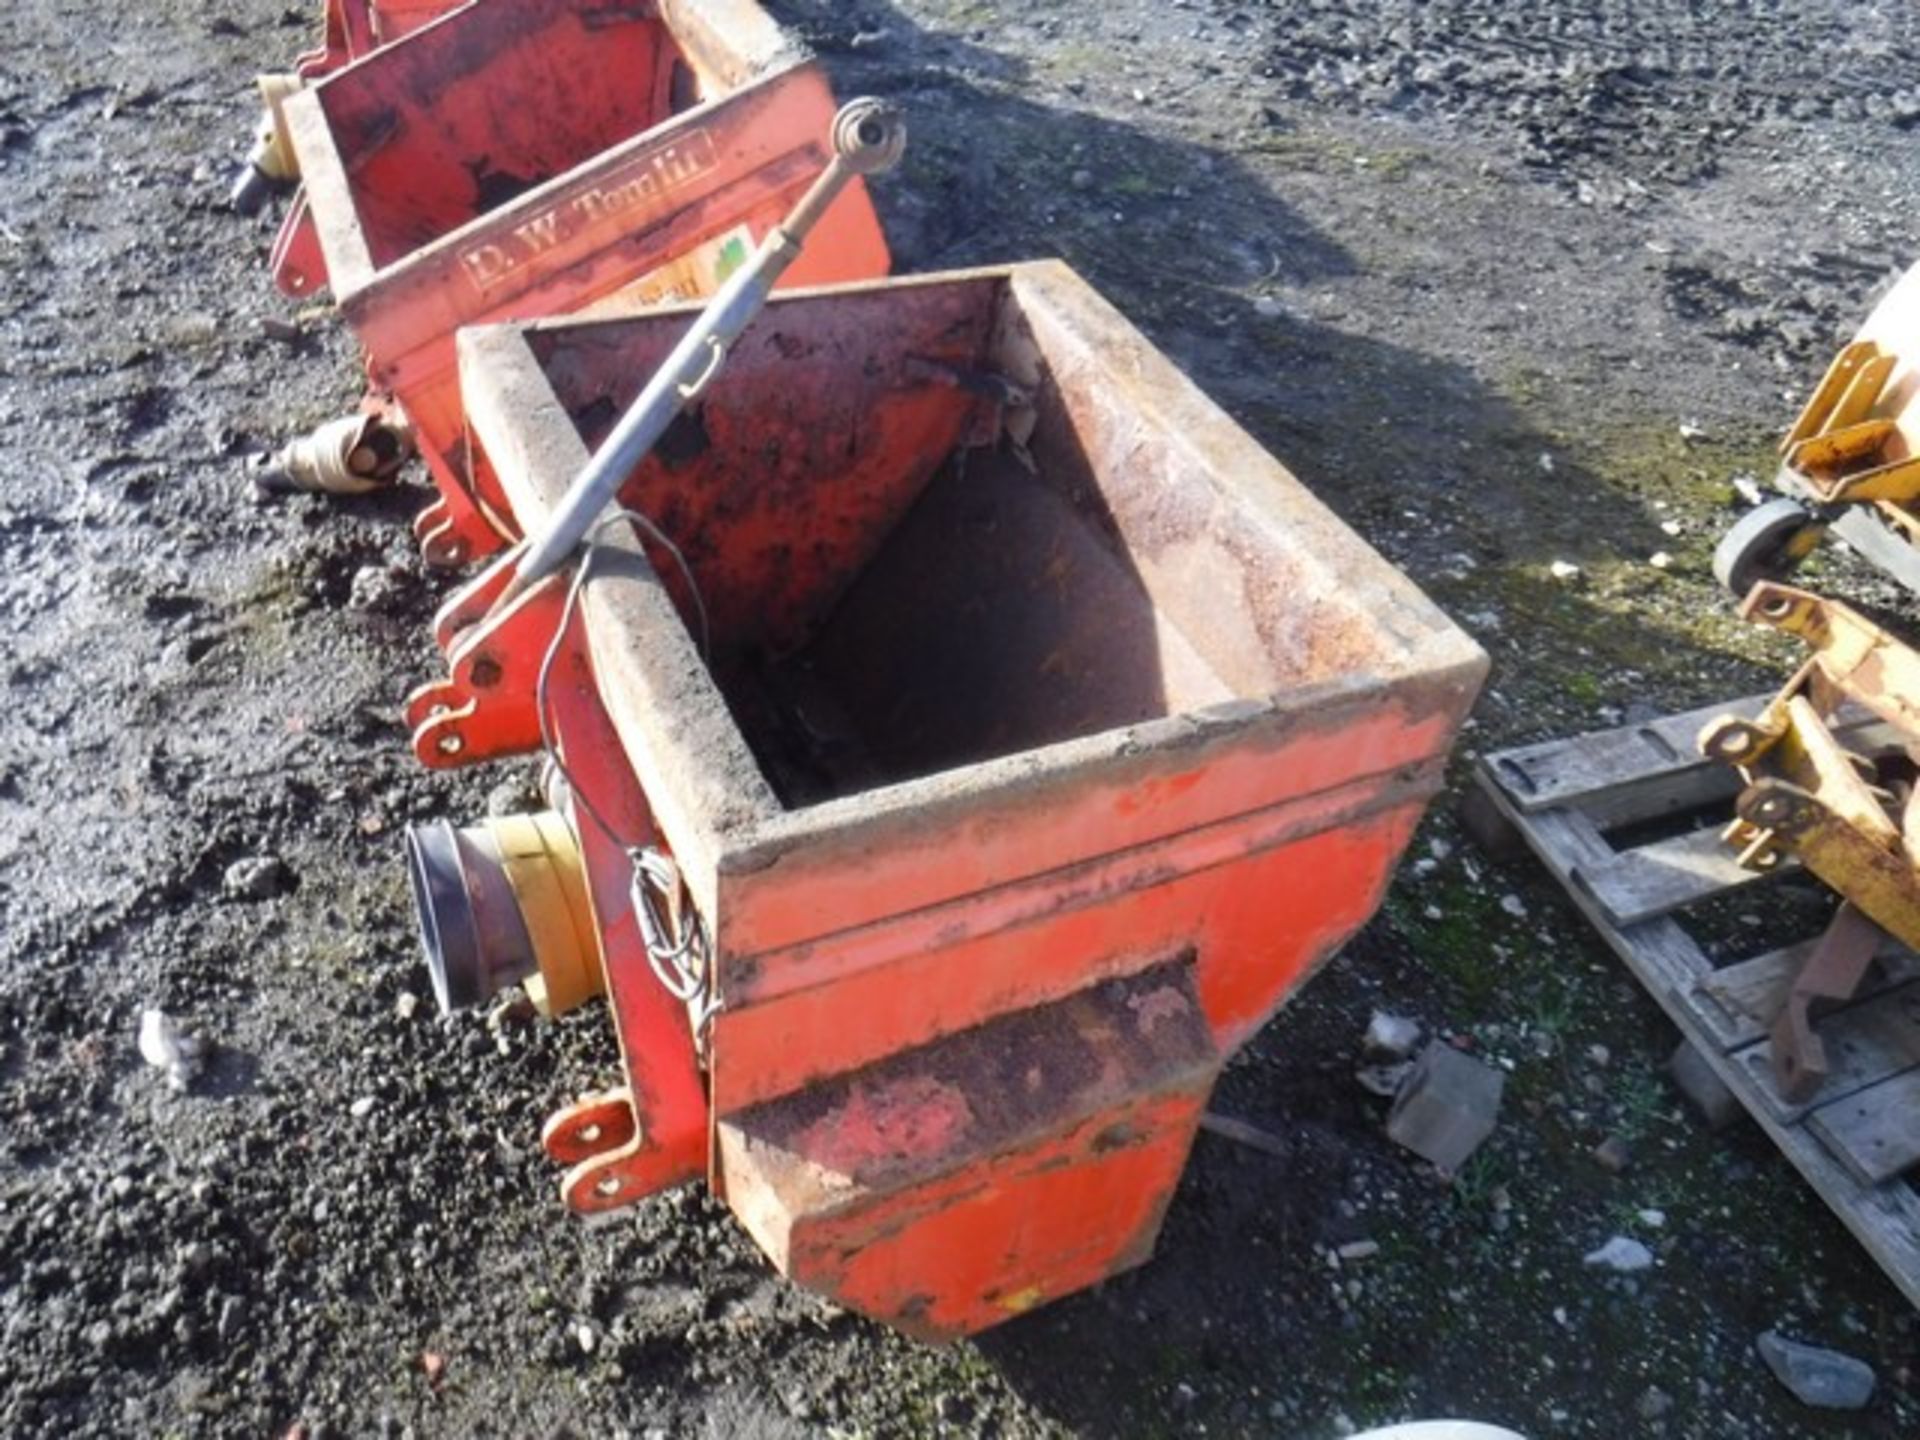 DW Tomlin PTO driven gritter 3 point mounting for Kubota tractor spares or repair - Image 2 of 3